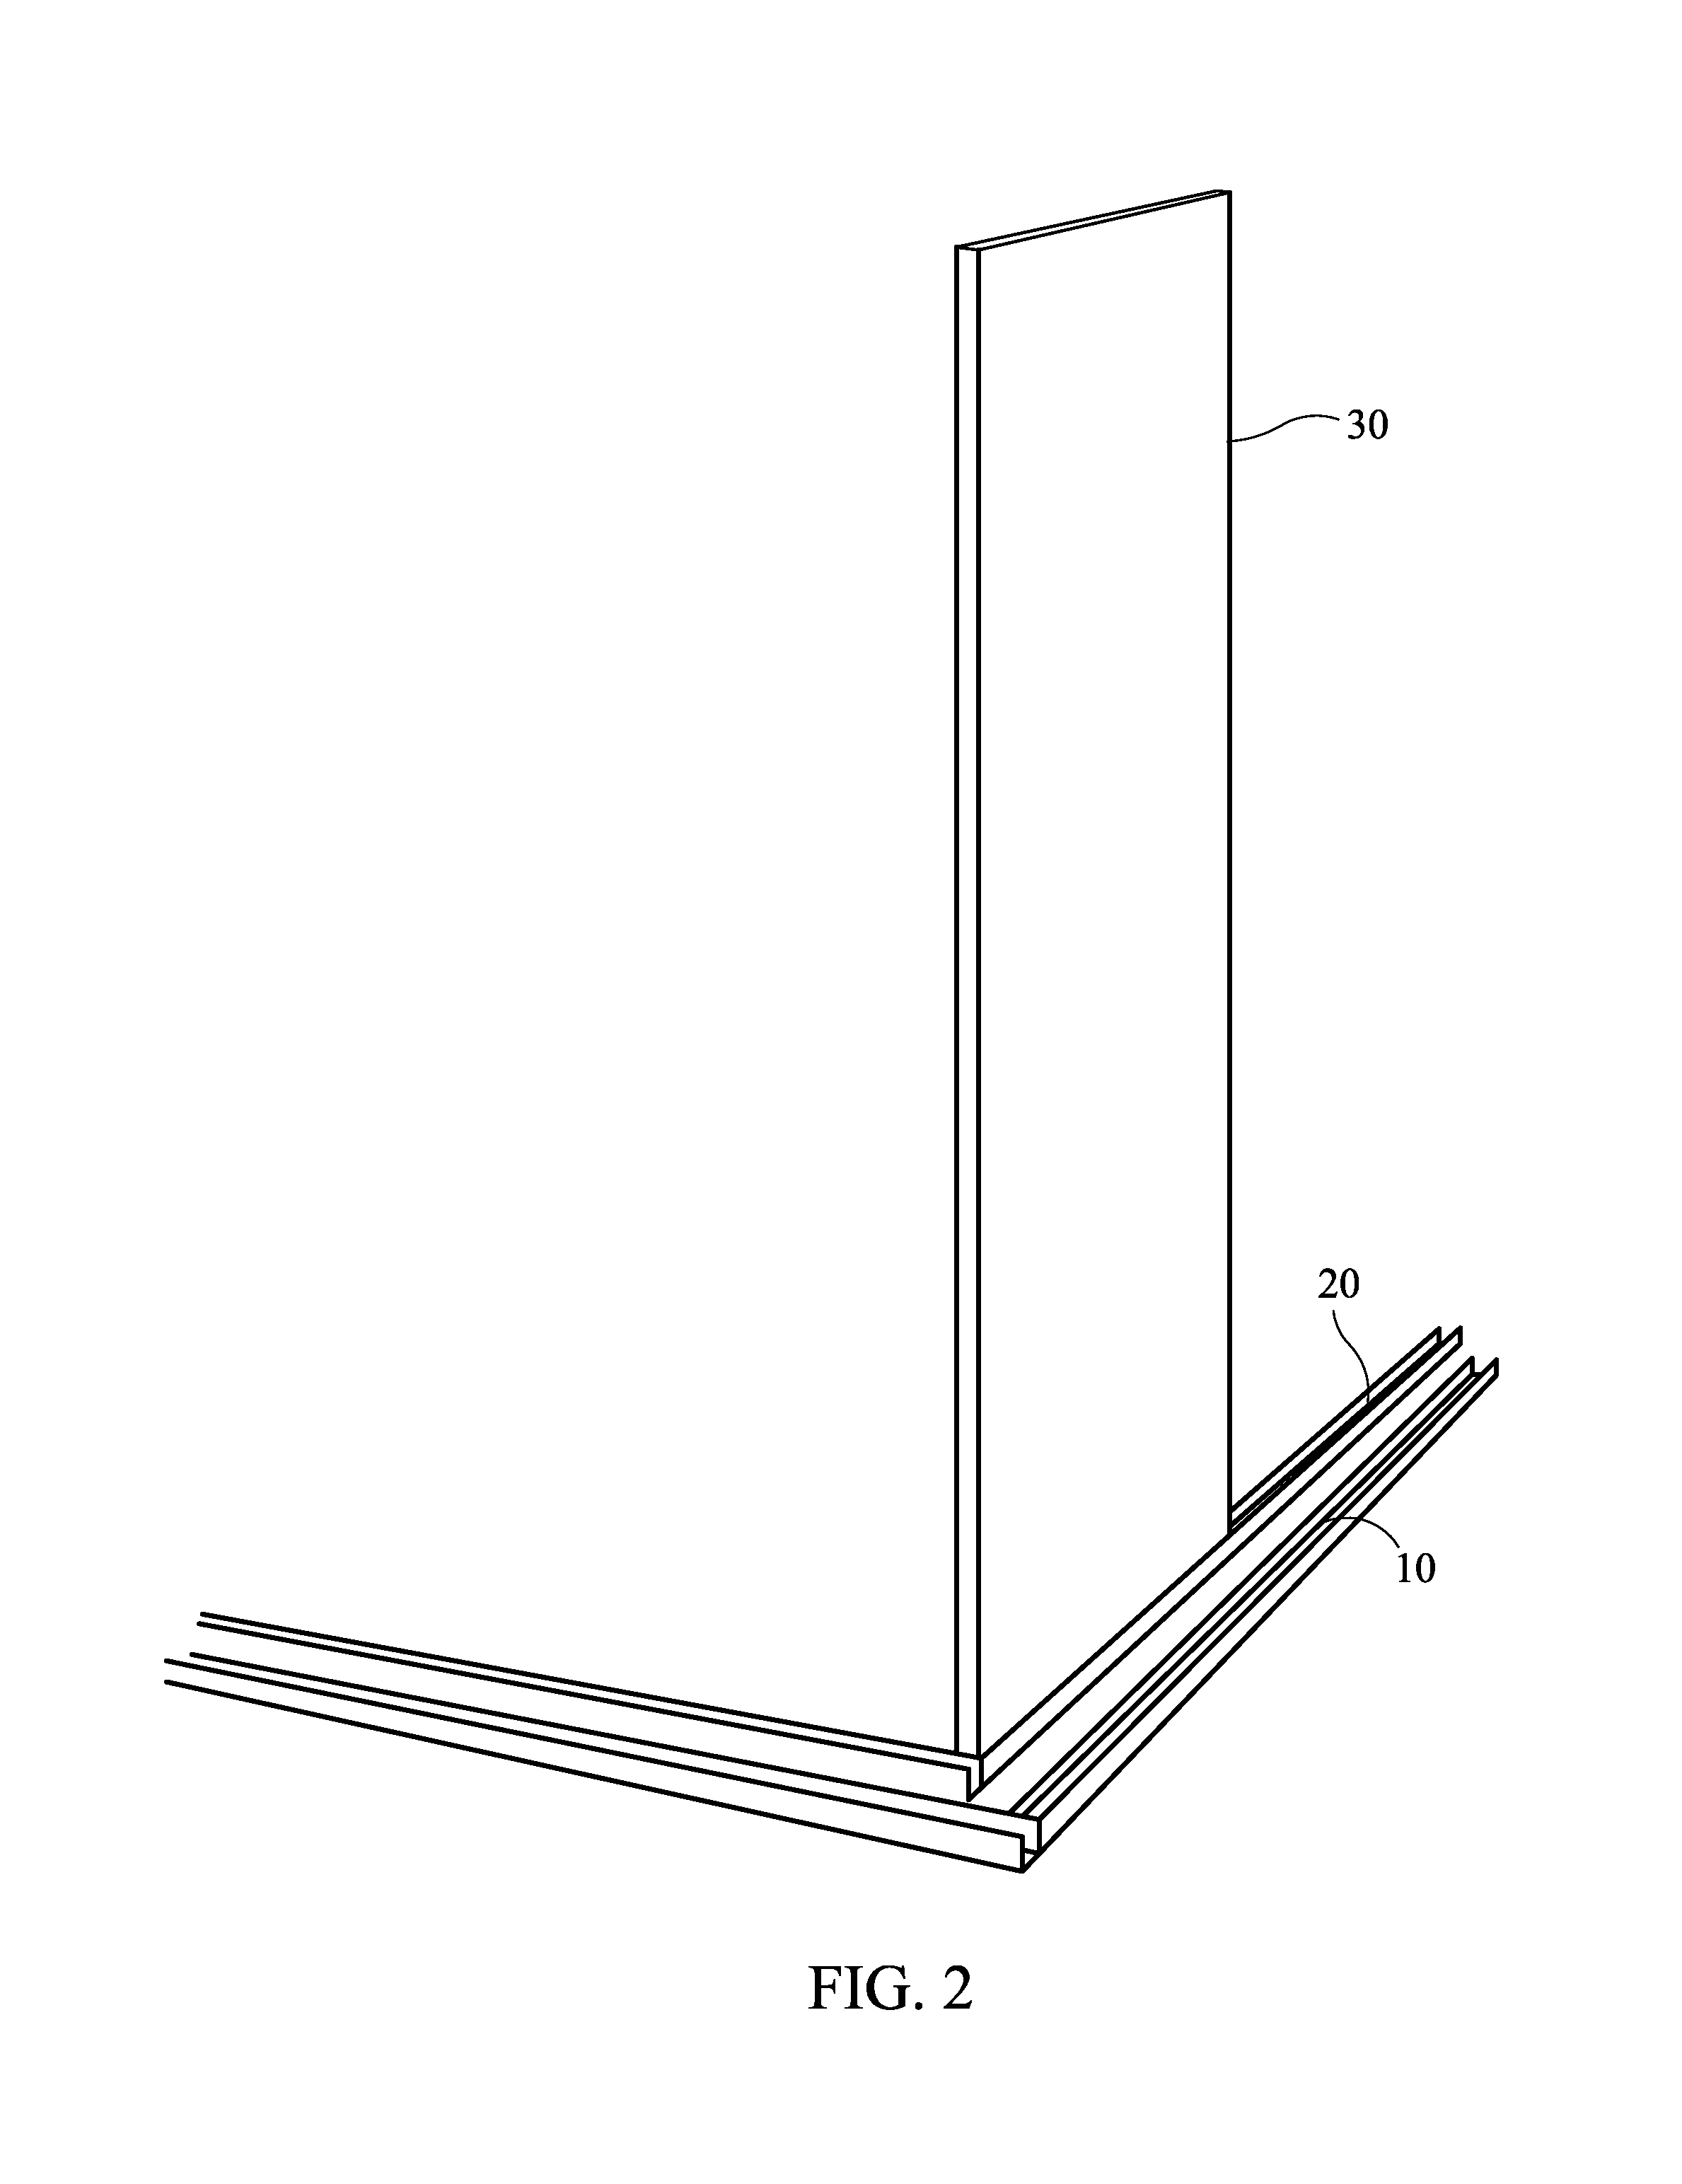 Insulated concrete form method and system